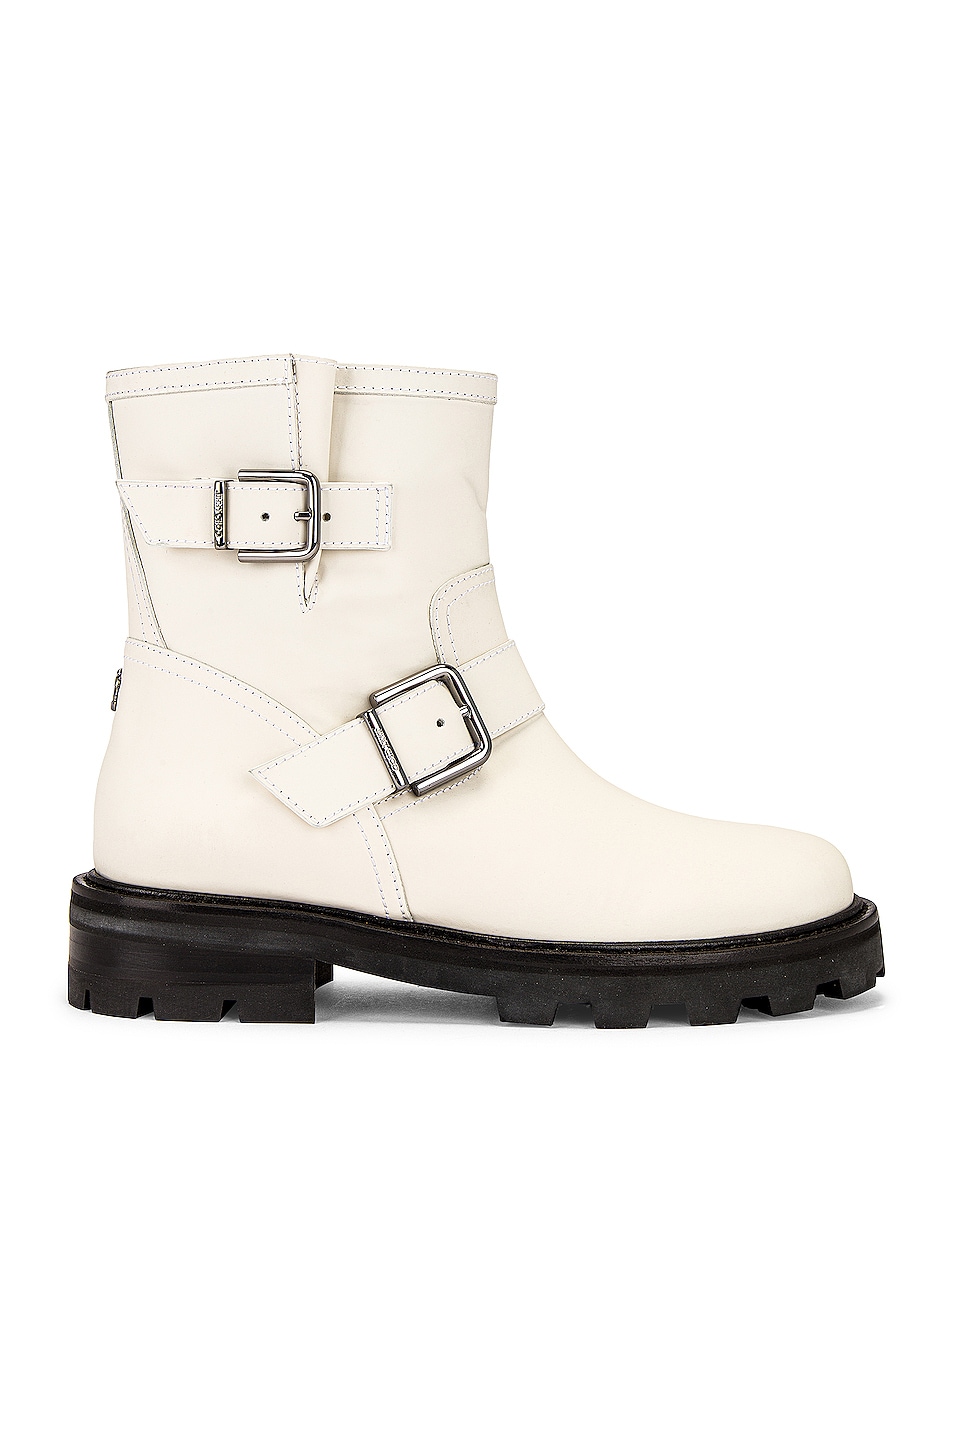 Image 1 of Jimmy Choo Youth II Rubberized Leather Boot in Latte